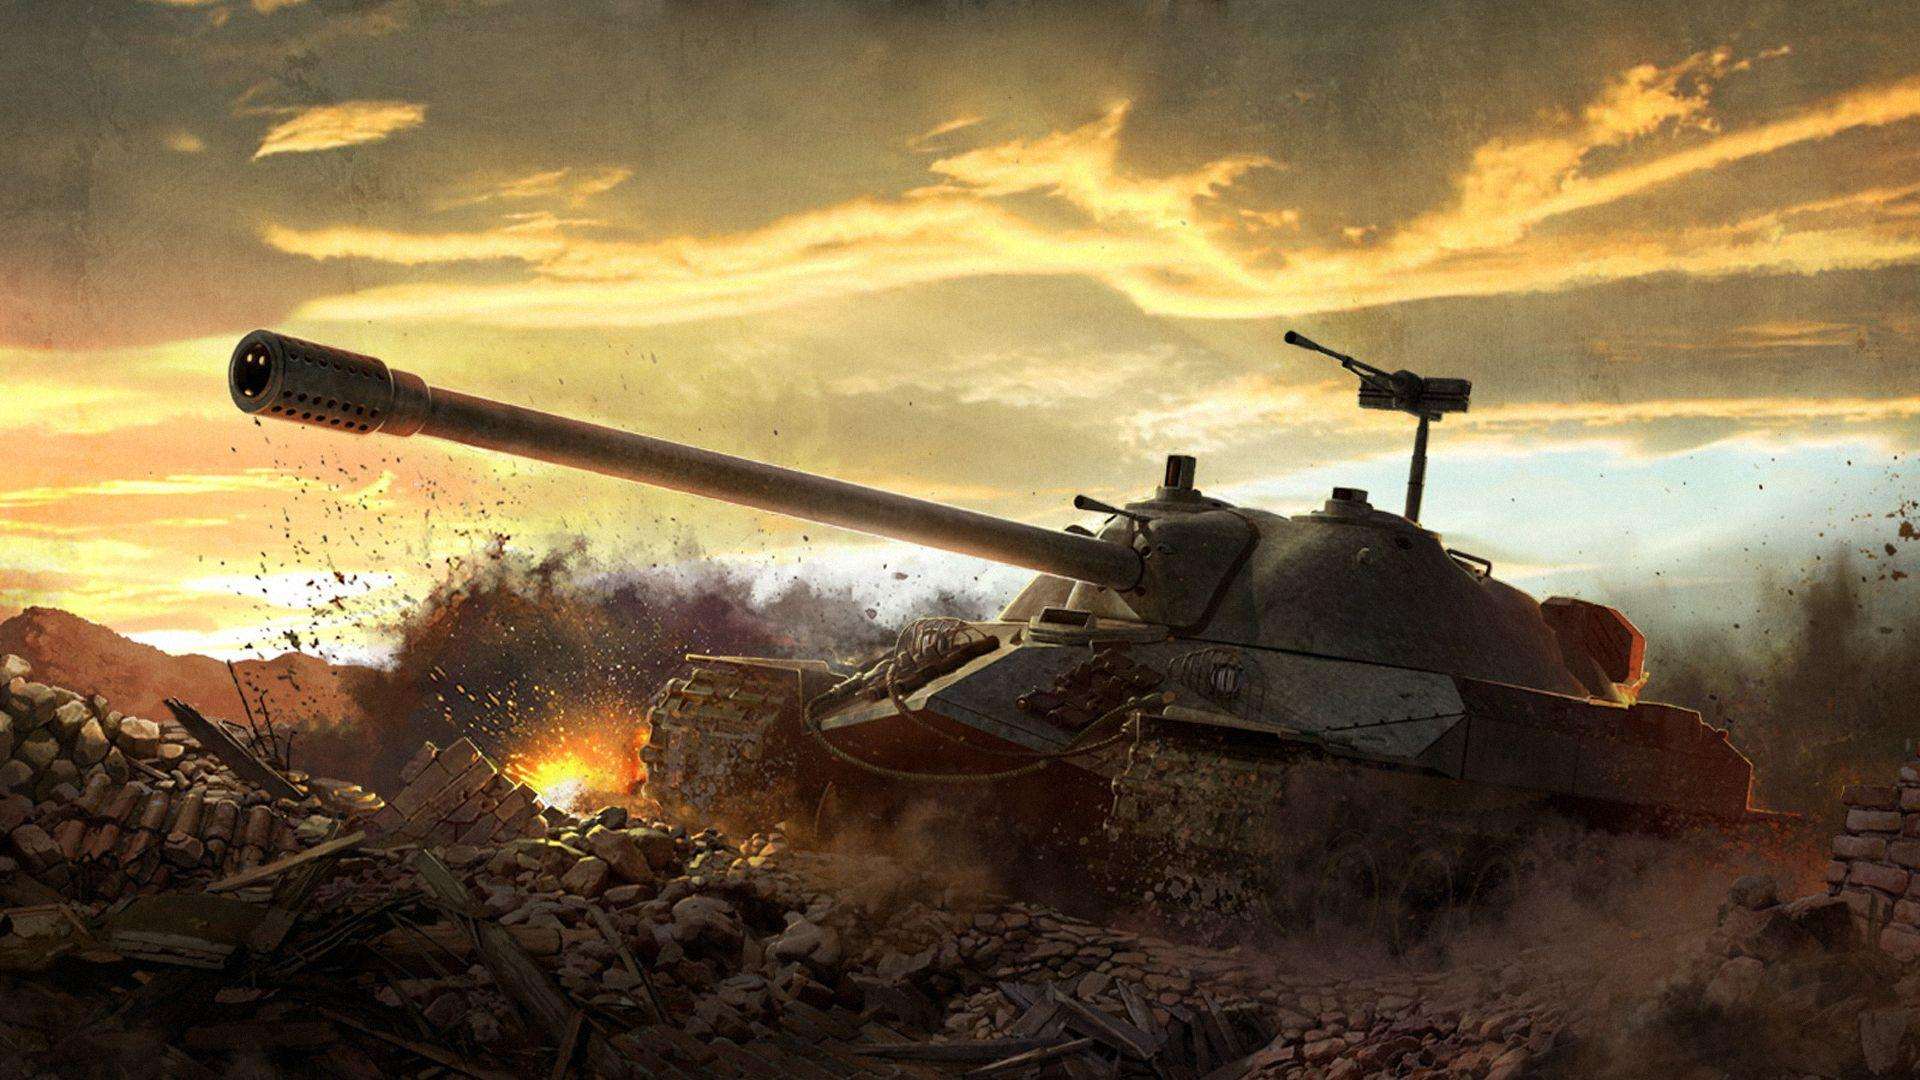 1920x1080 World Of Tanks Wallpapers